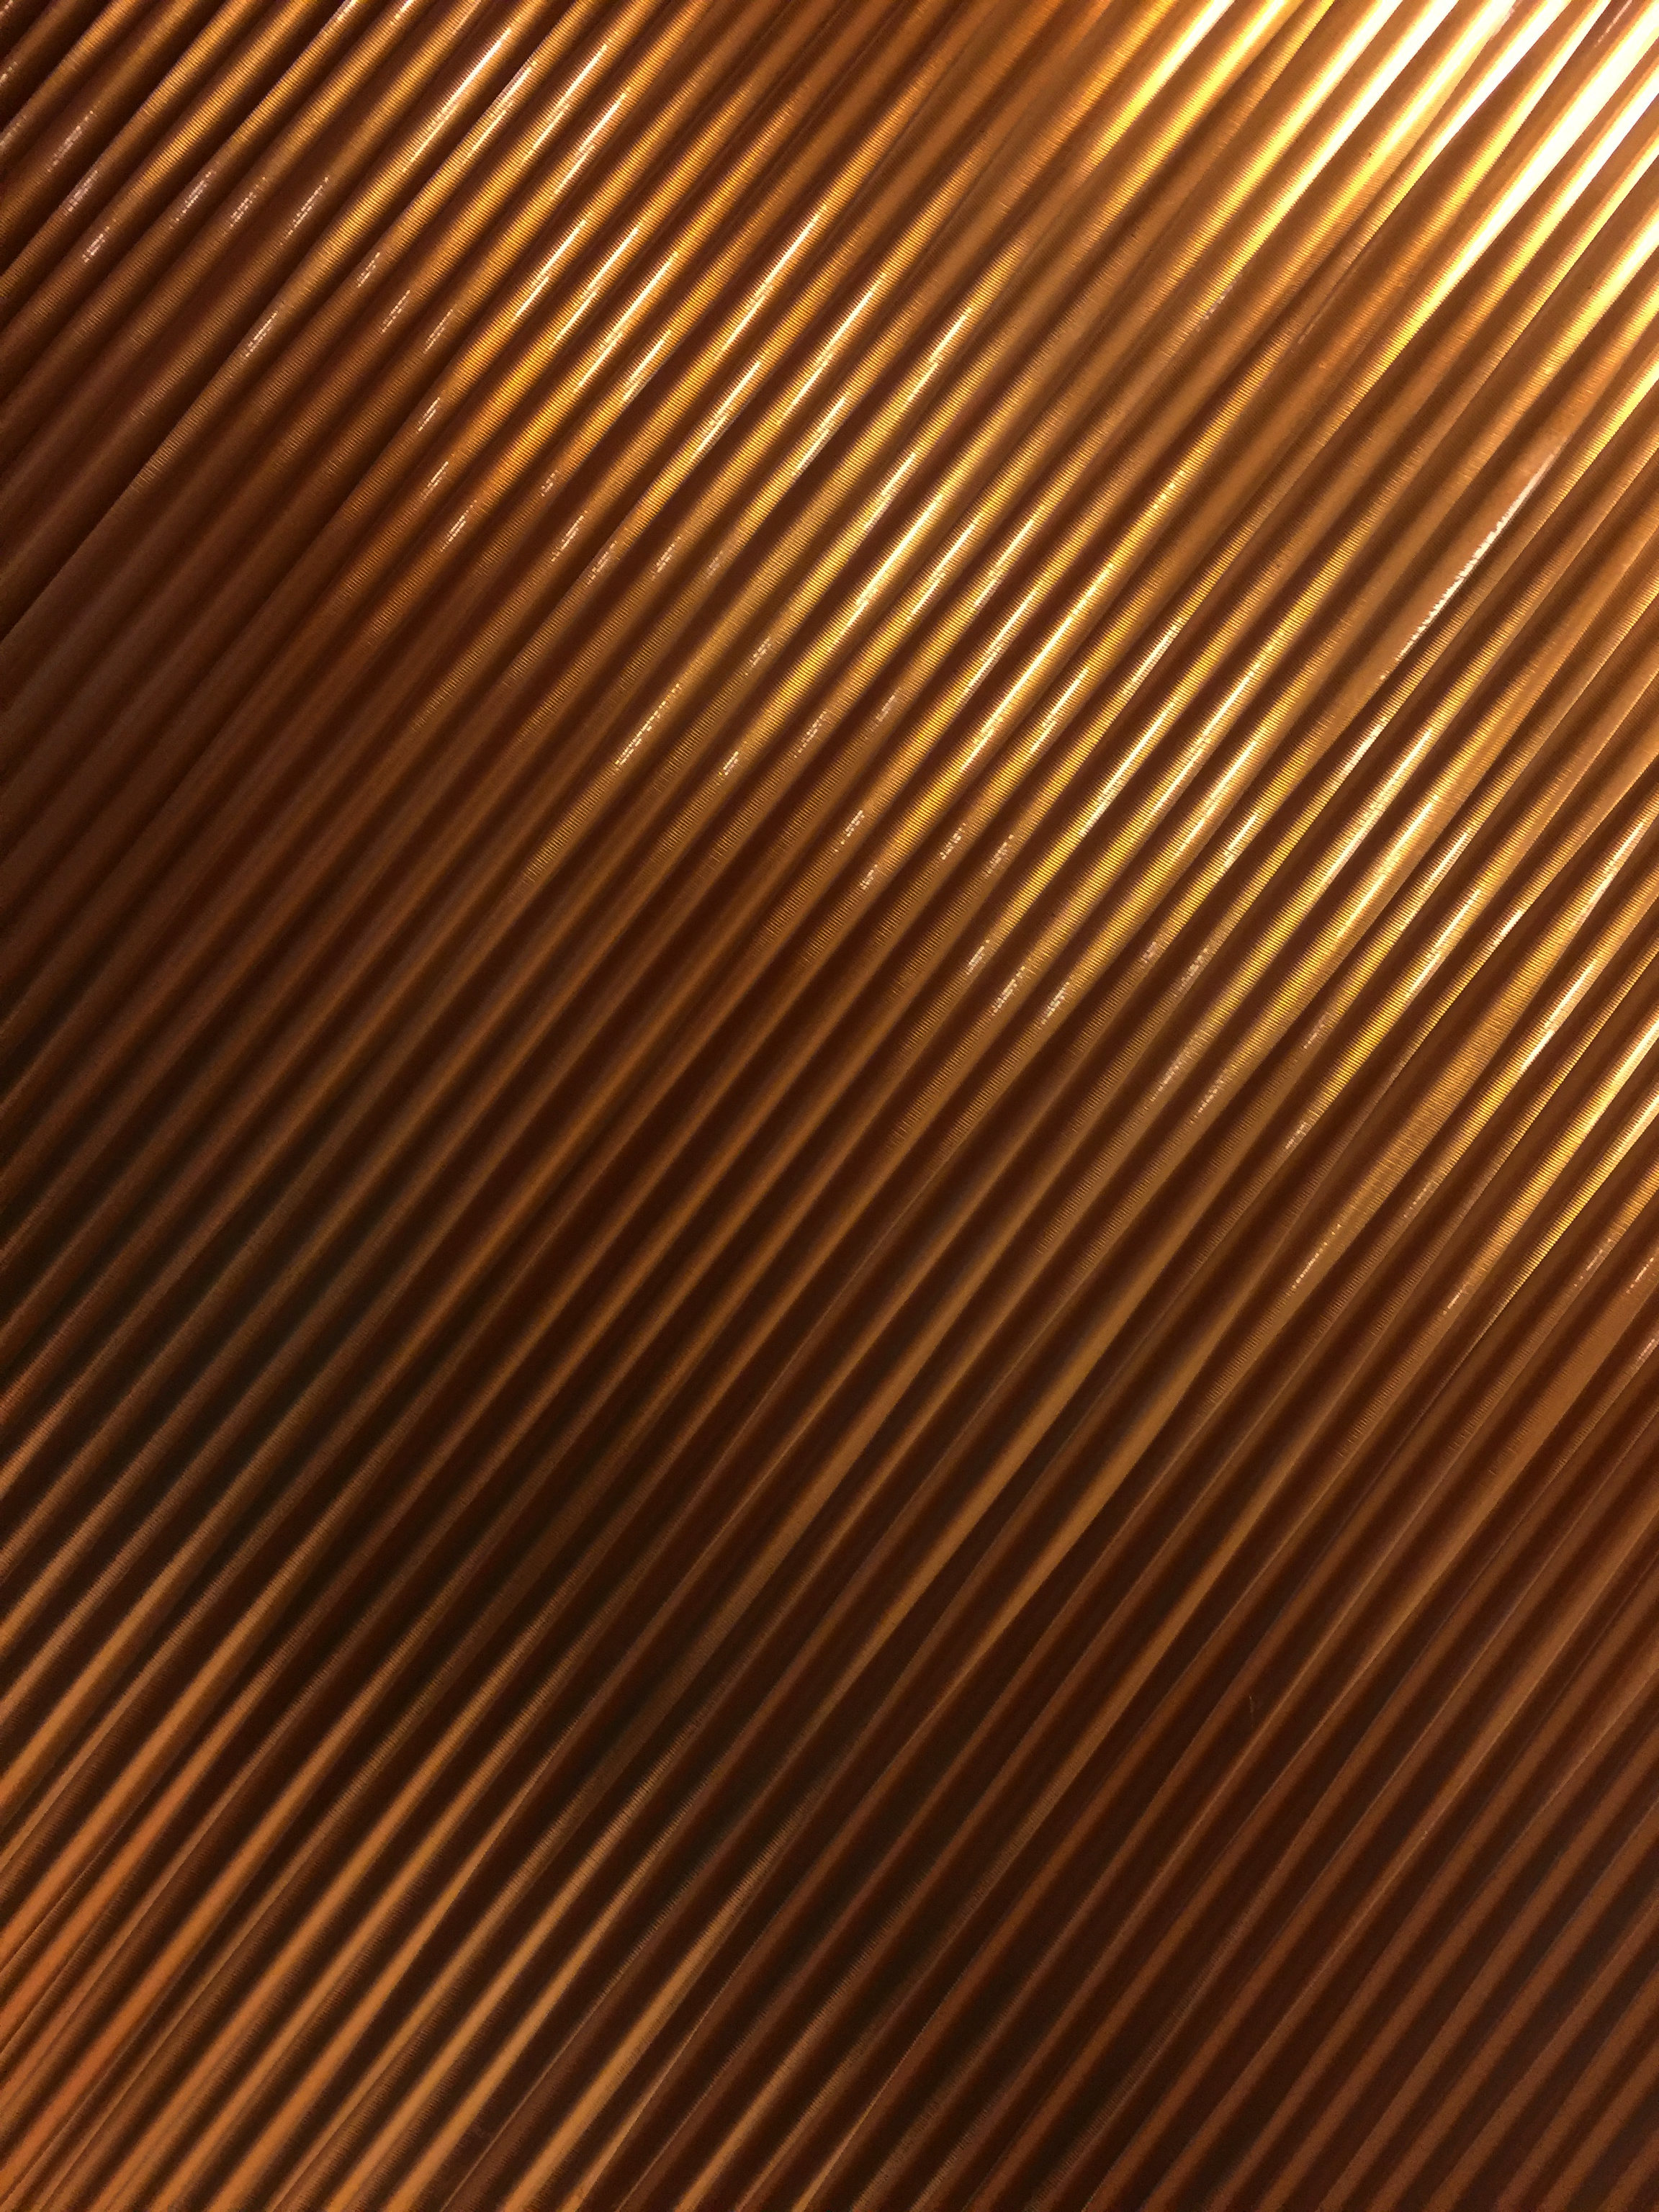 32k Wallpaper Streaks fluted, ribbed, surface, textures